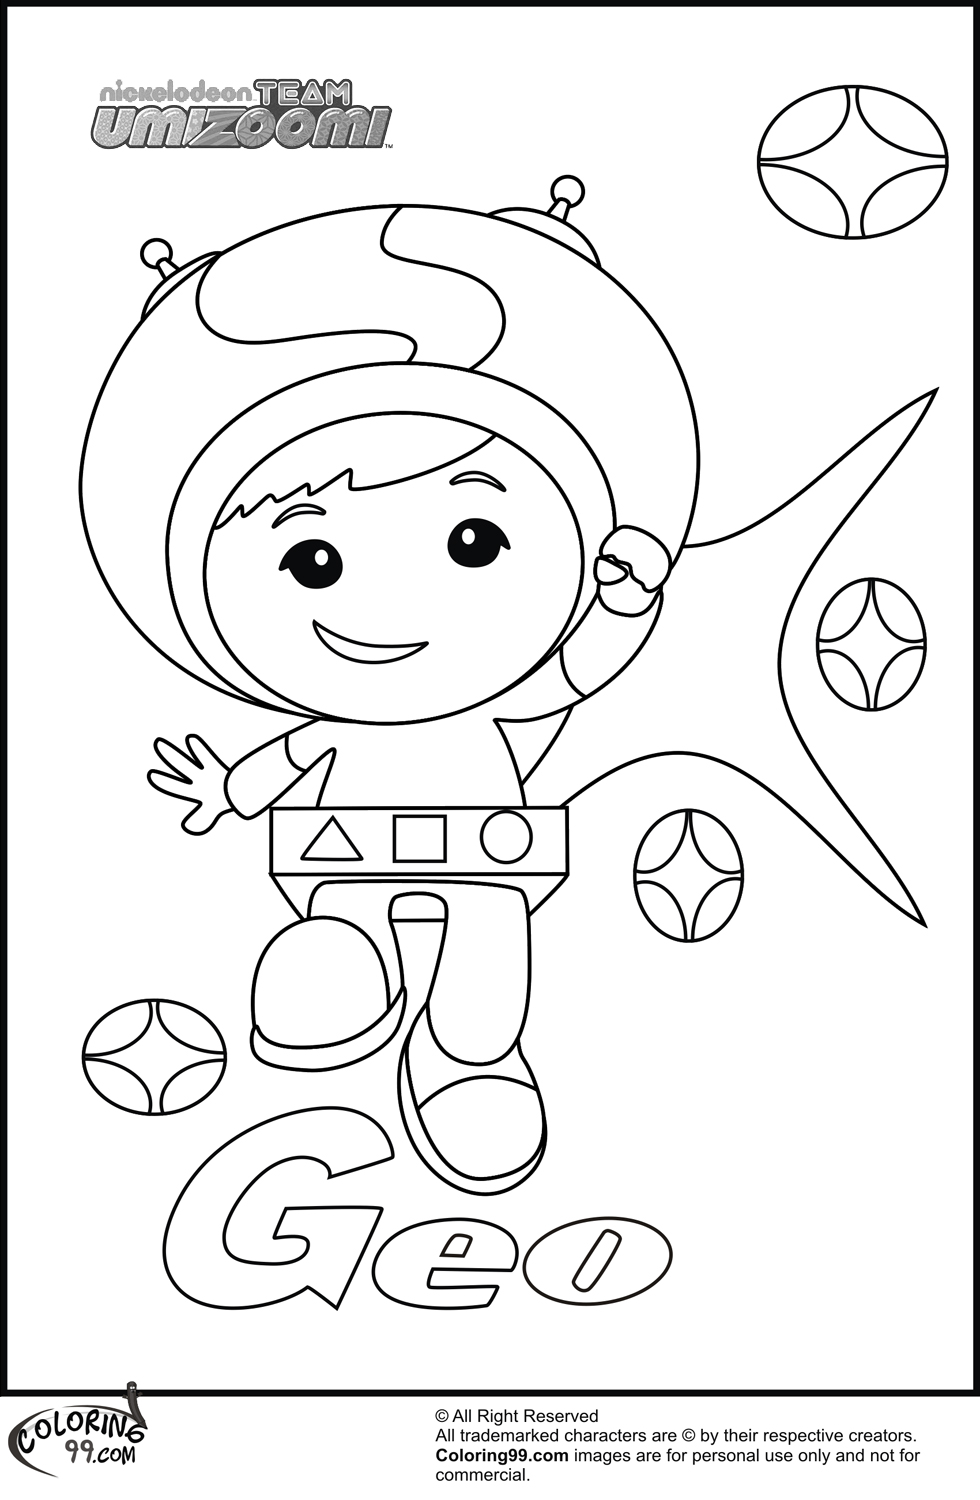 Team Umizoomi Coloring Pages 2